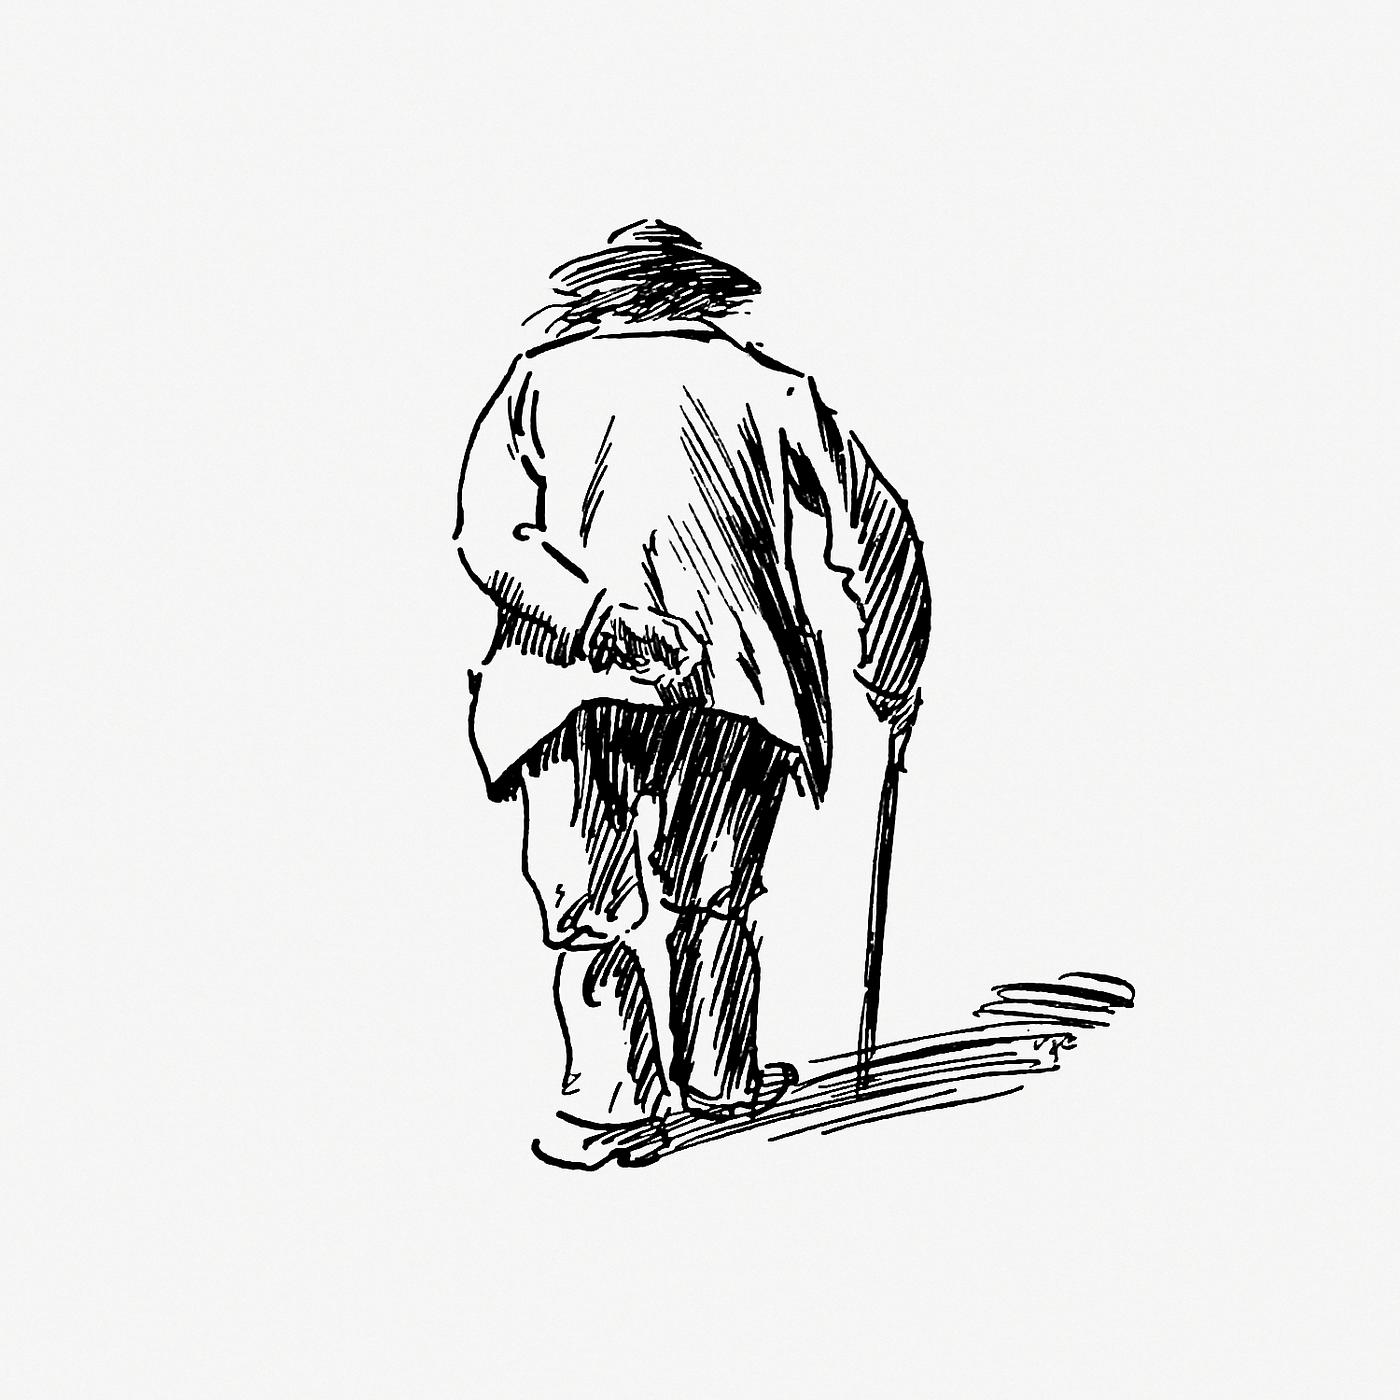 Drawing of an elderly man's back